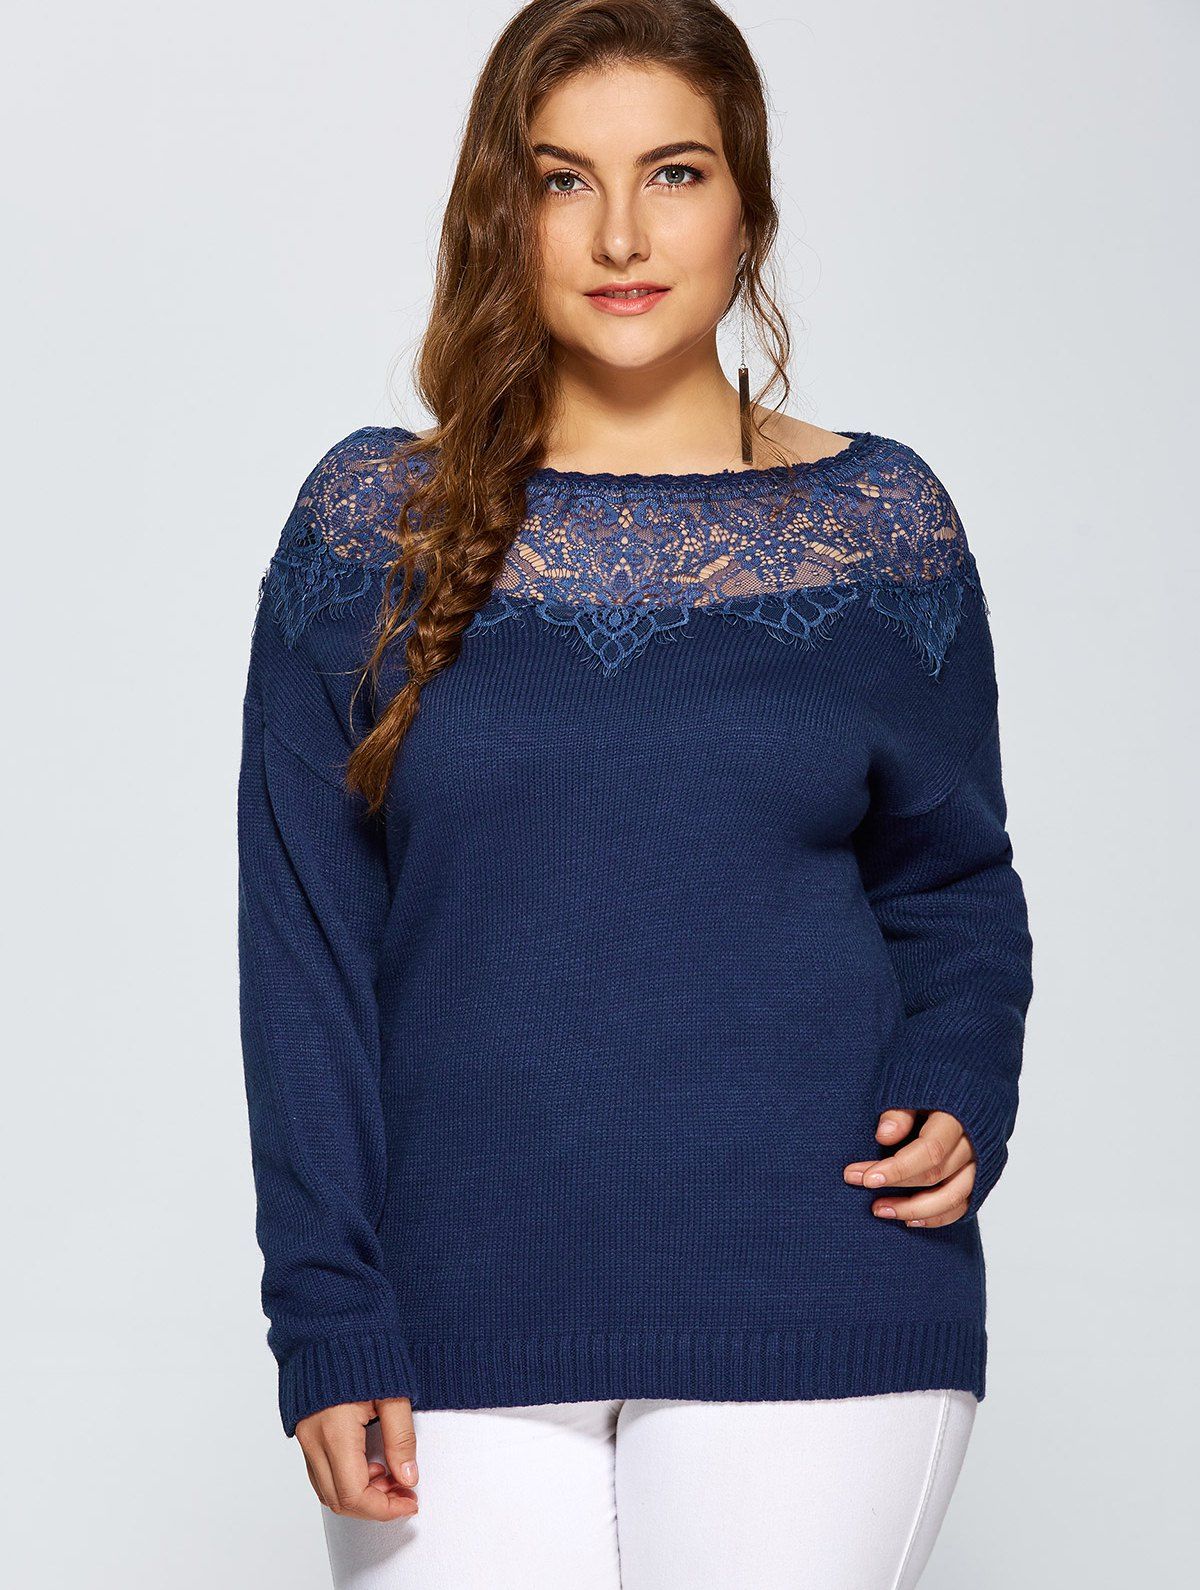 Plus Size Lace Spliced Pullover Sweater - DEEP BLUE 3XL